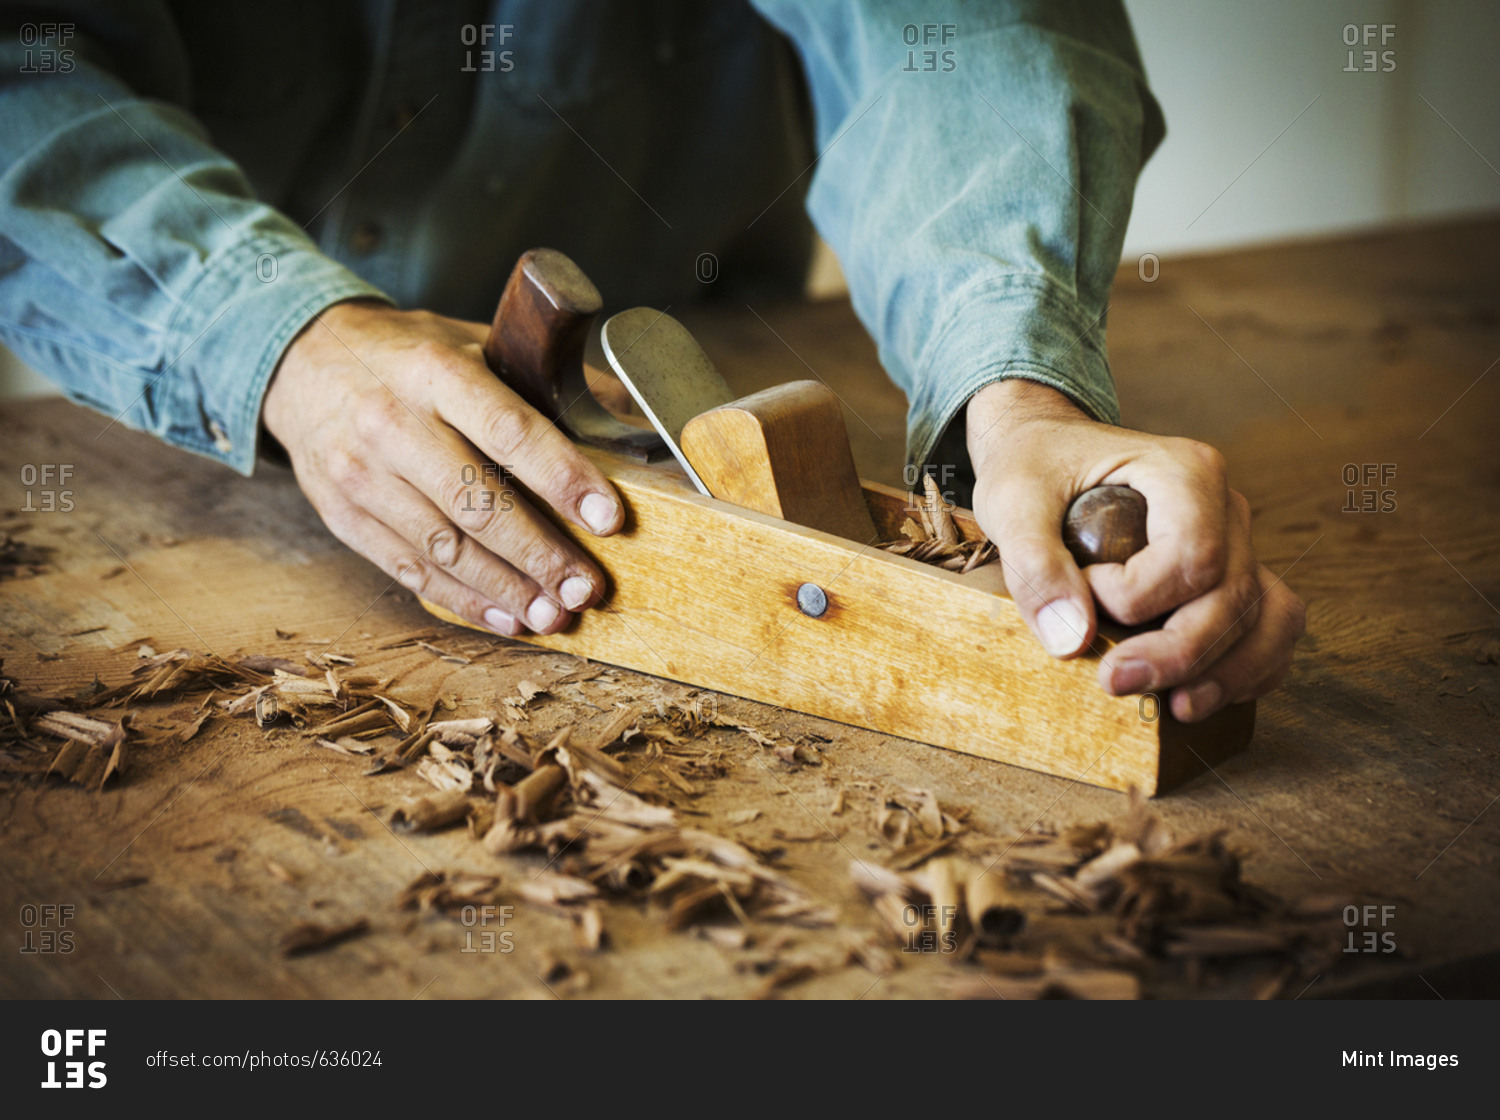 A workman using a hand wood plane on the surface of a large piece of wood.